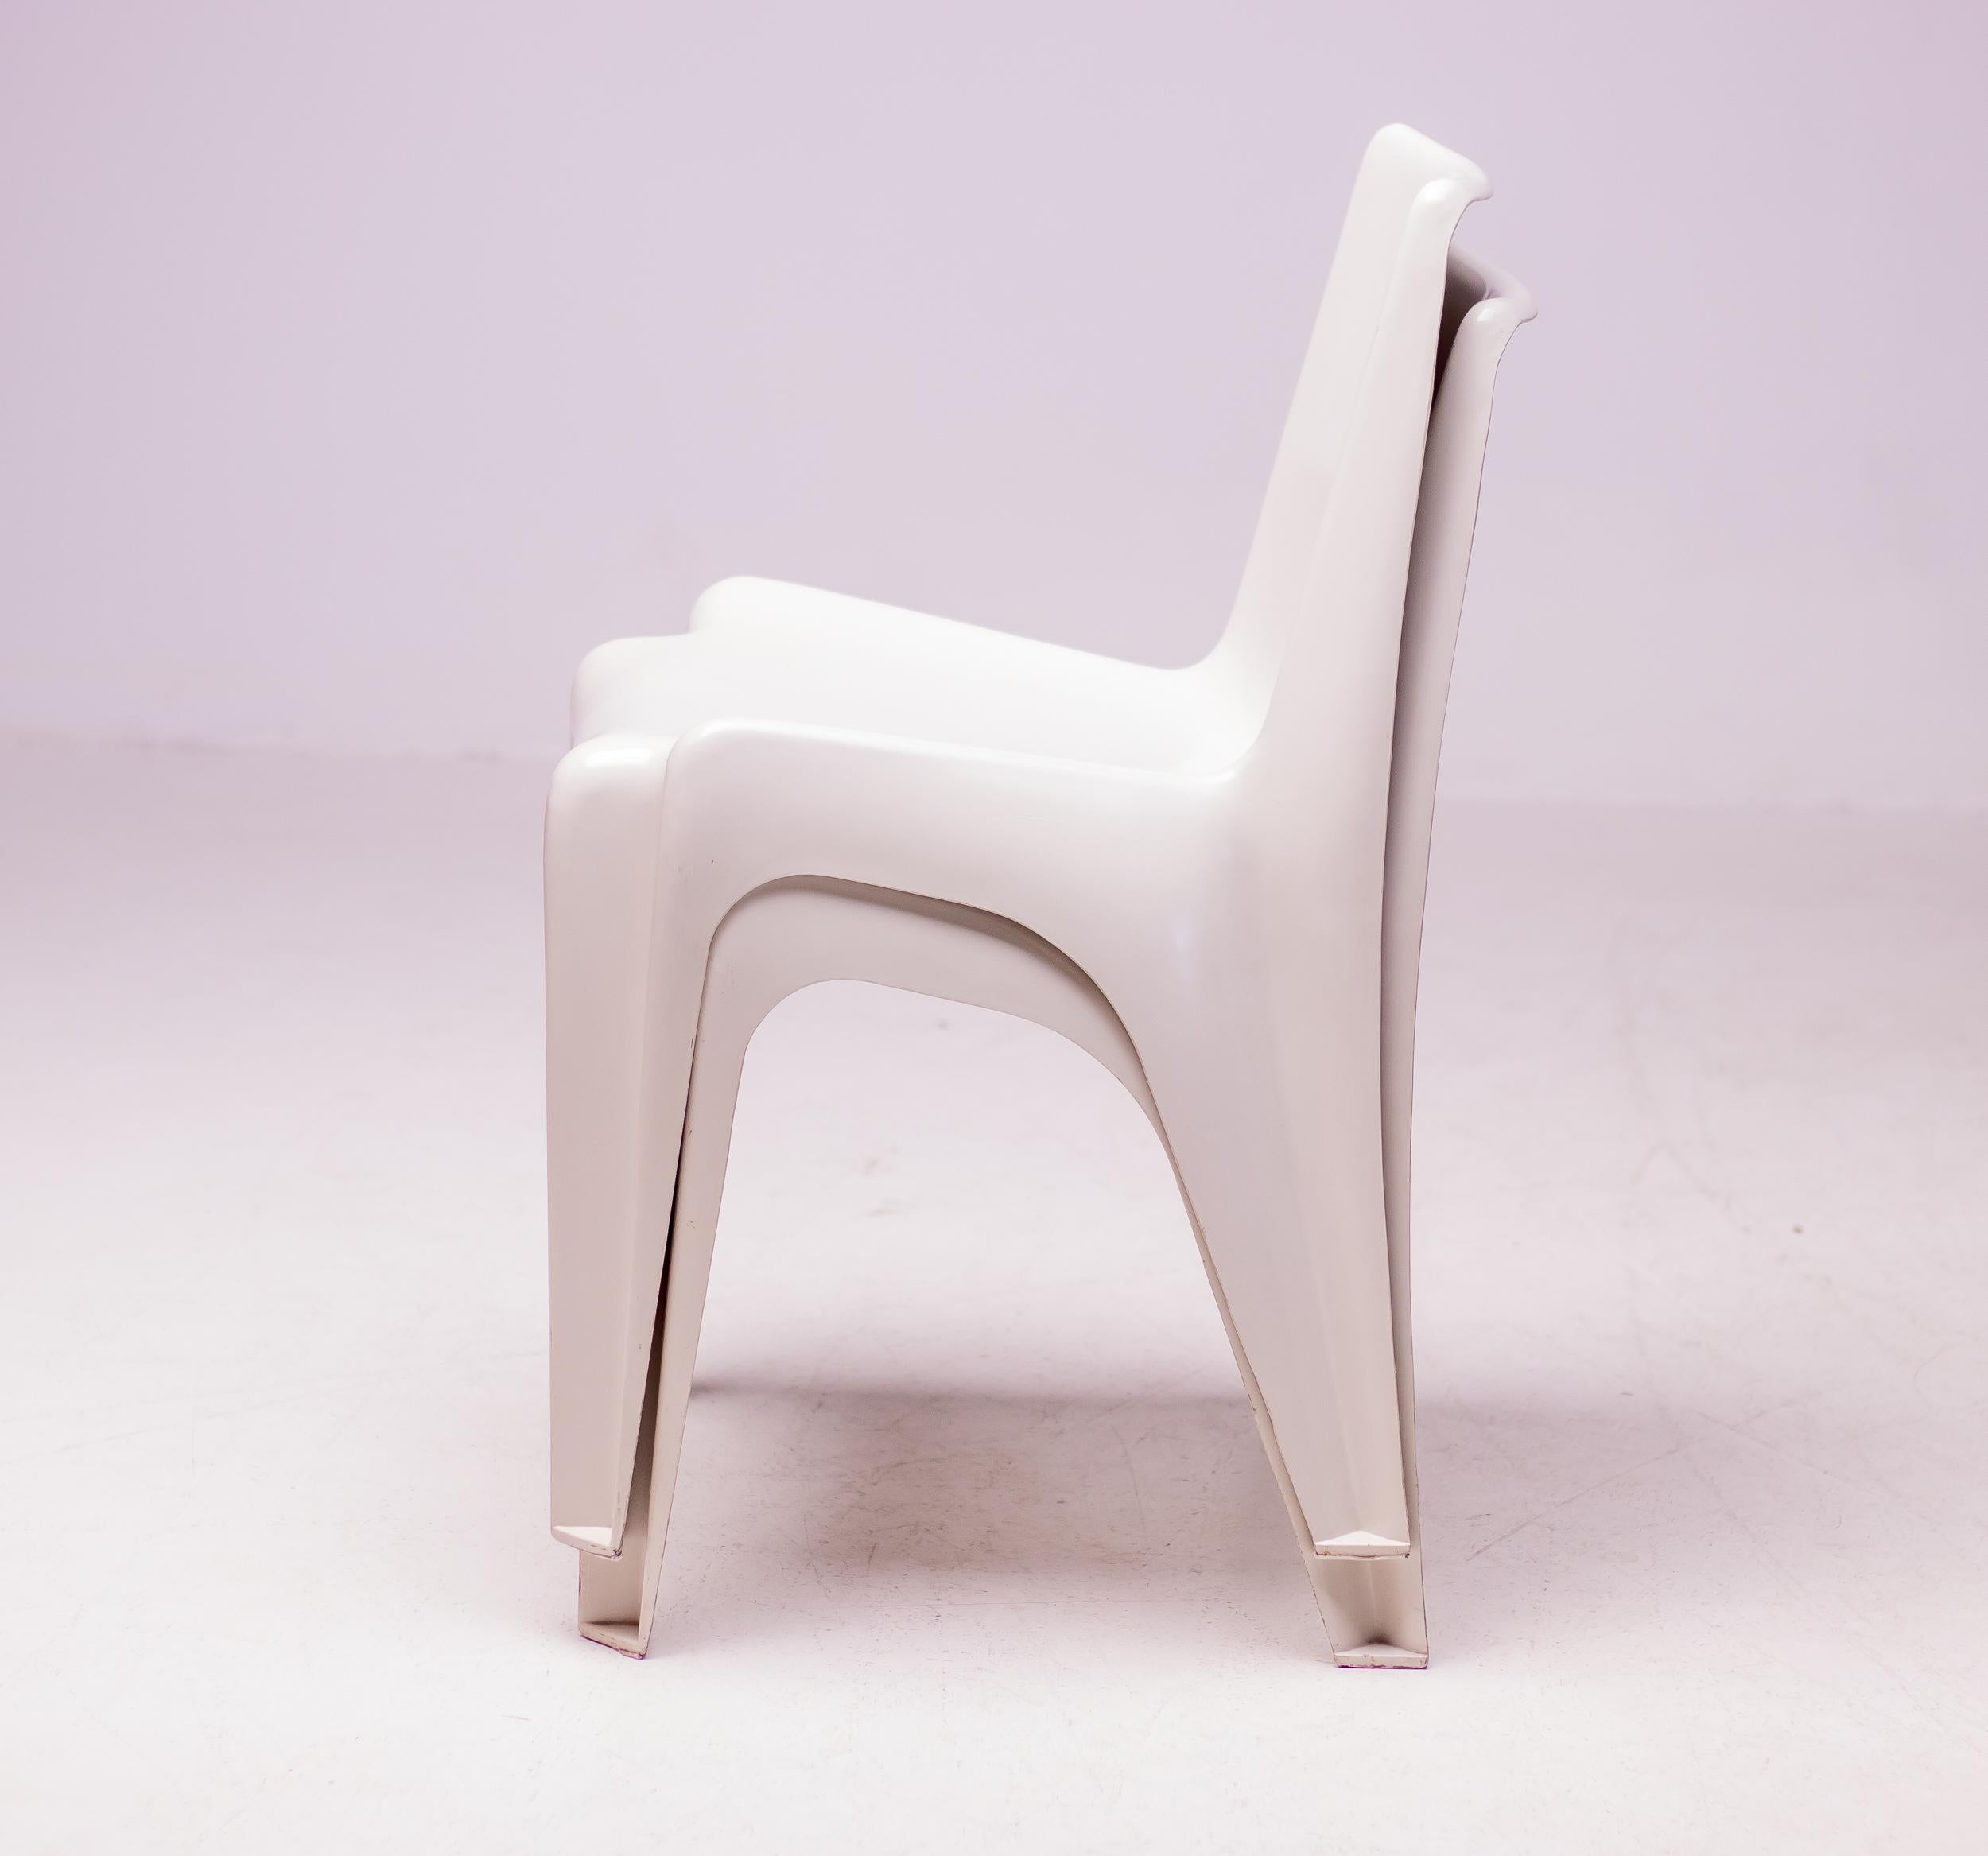 The model BA 1171 chair was designed by architect and designer Helmit Bätzner in 1964 for Bofinger in Germany. 
The stackable Bofinger chair was the first chair made in fiberglass reinforced polyester developed to be produced in one single pressing